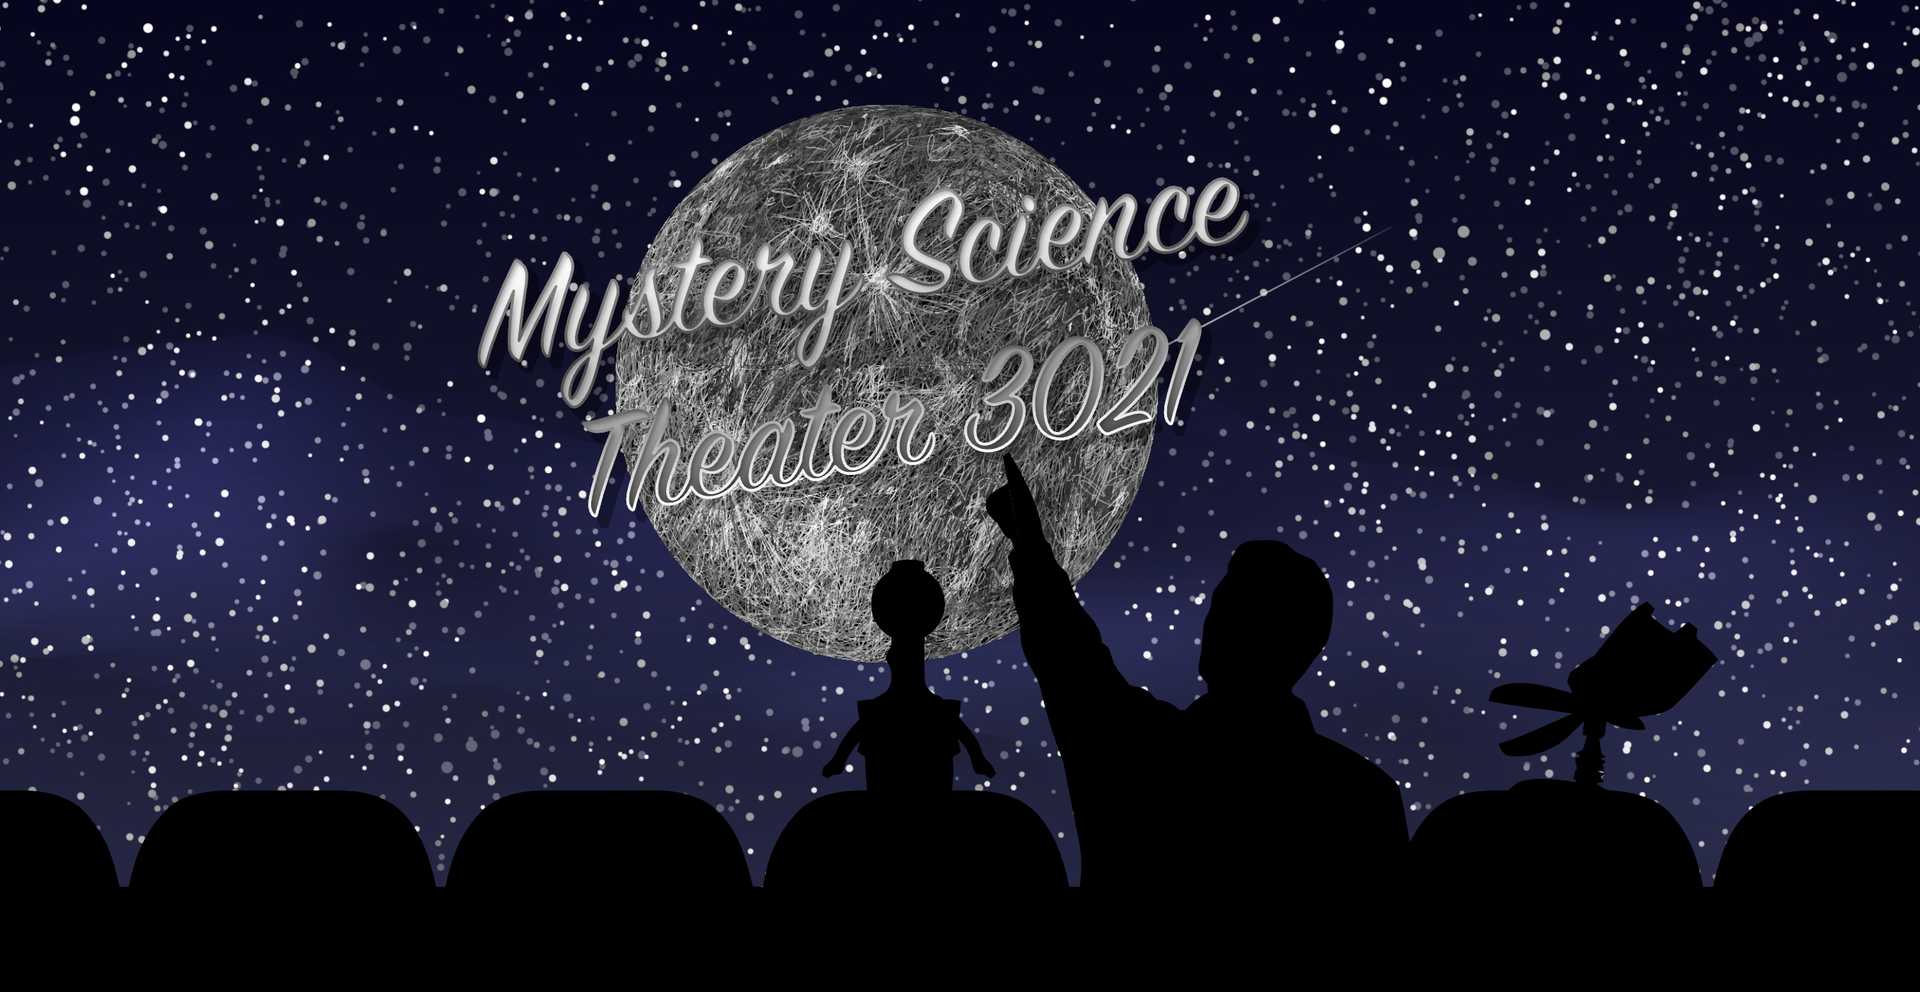 Mystery Science Theater remade with svg/video - Featured image